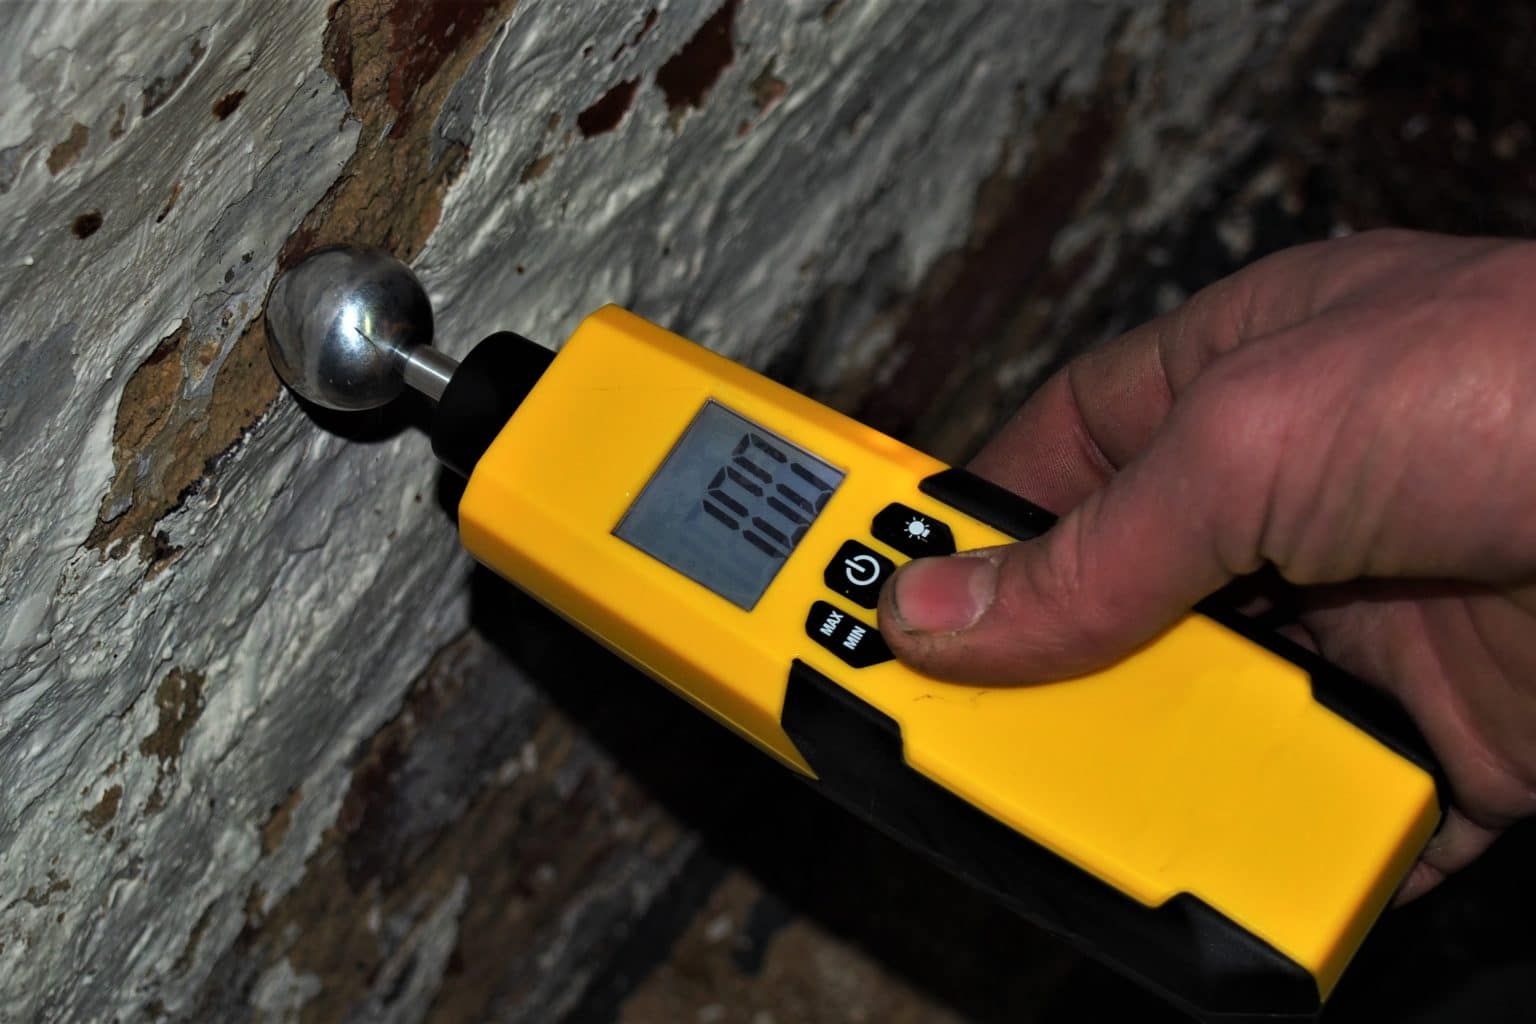 Moisture Meters for Home Inspectors: Evaluating dampness & damage